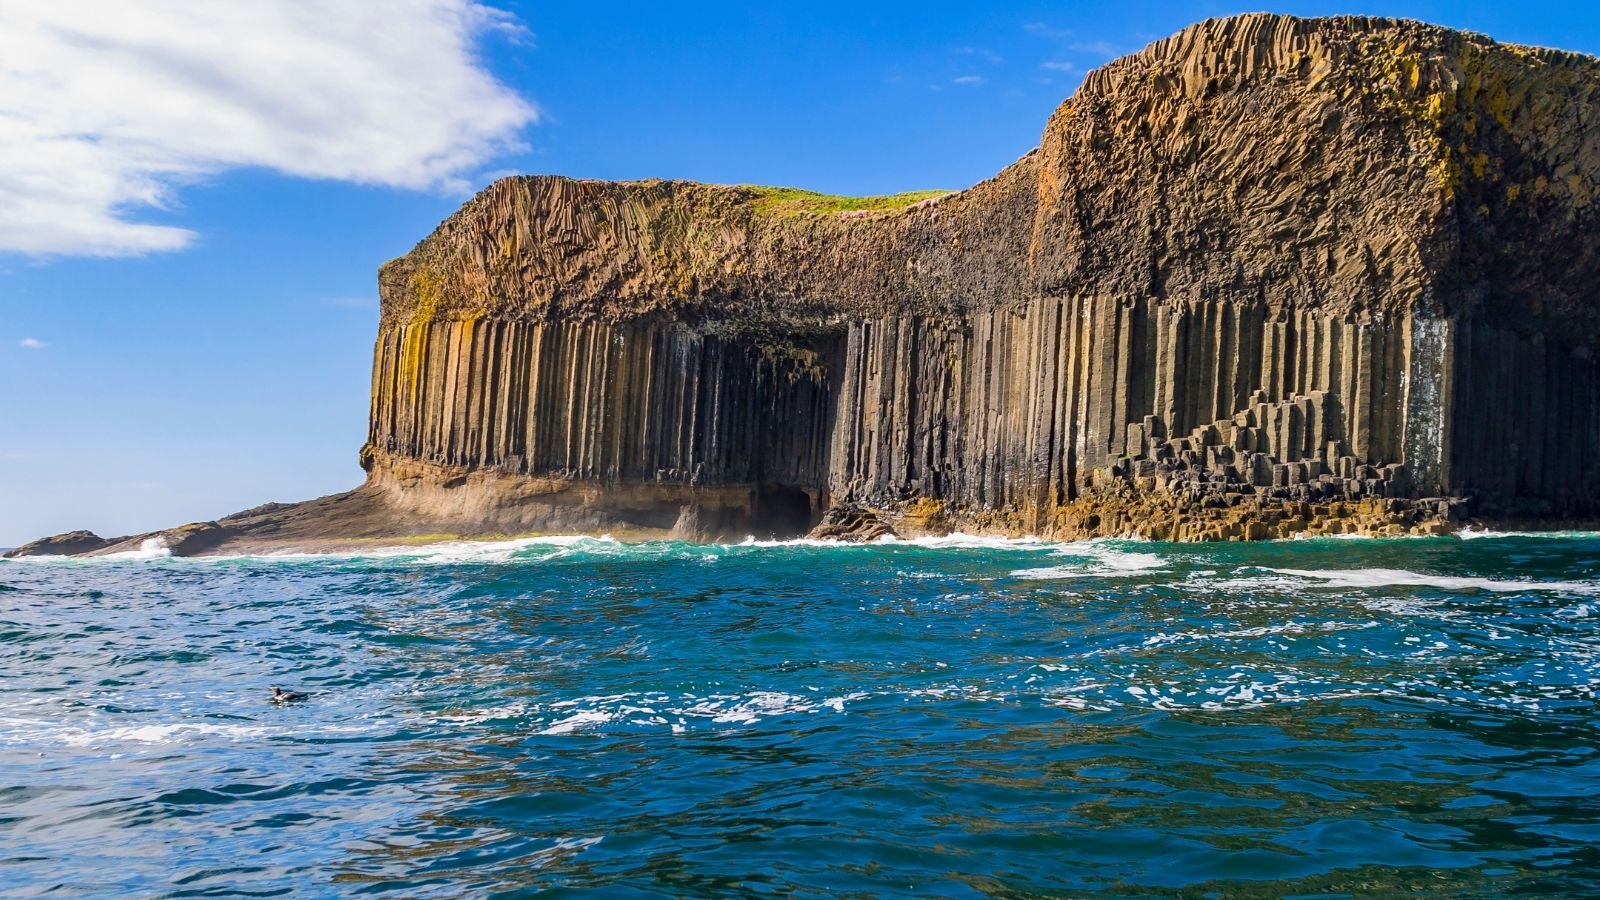 <p>The Fingal’s Cave is an uninhabited island that hides among the cliffs and rock structures on Scotland’s West Coast. The hexagonal pillars inside the cave flank its walls. When the wind blows, it creates haunting music inside. <a href="https://www.heraldscotland.com/news/23571592.fingals-cave-named-popular-hidden-gem-world/" rel="noopener">It is the most popular hidden gem in the world. </a></p>